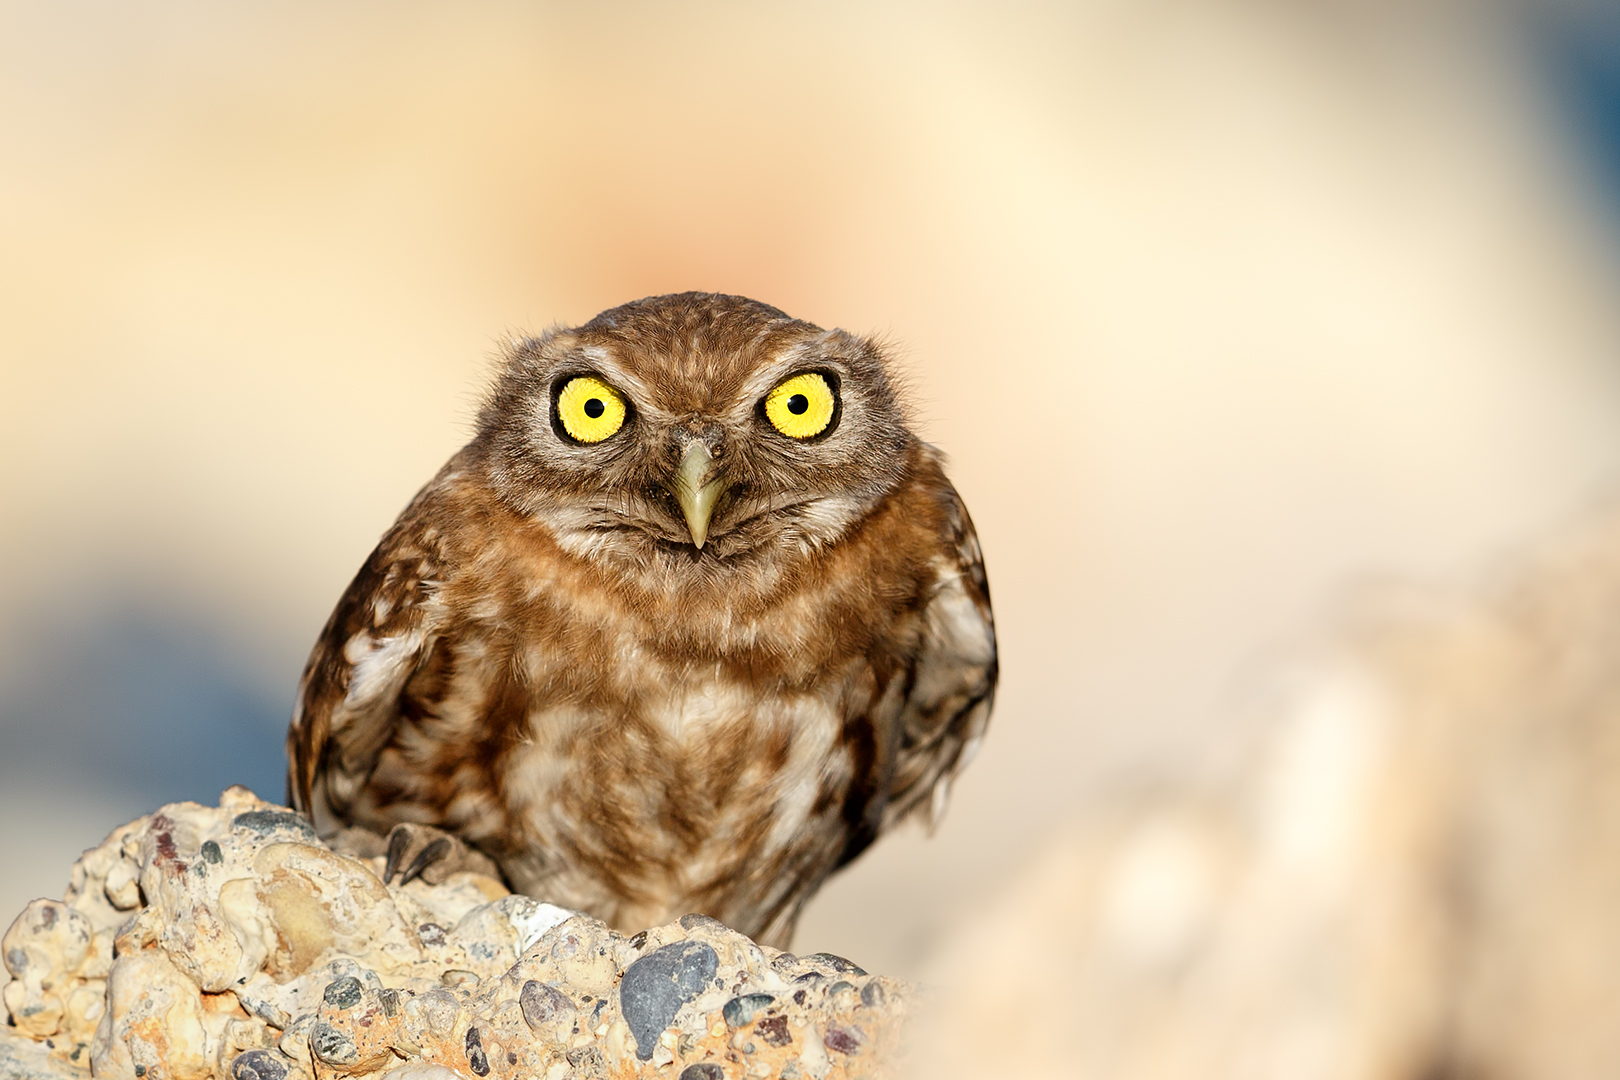 40 Angry Birds Who Don't Give A Hoot About What You Think - 500px